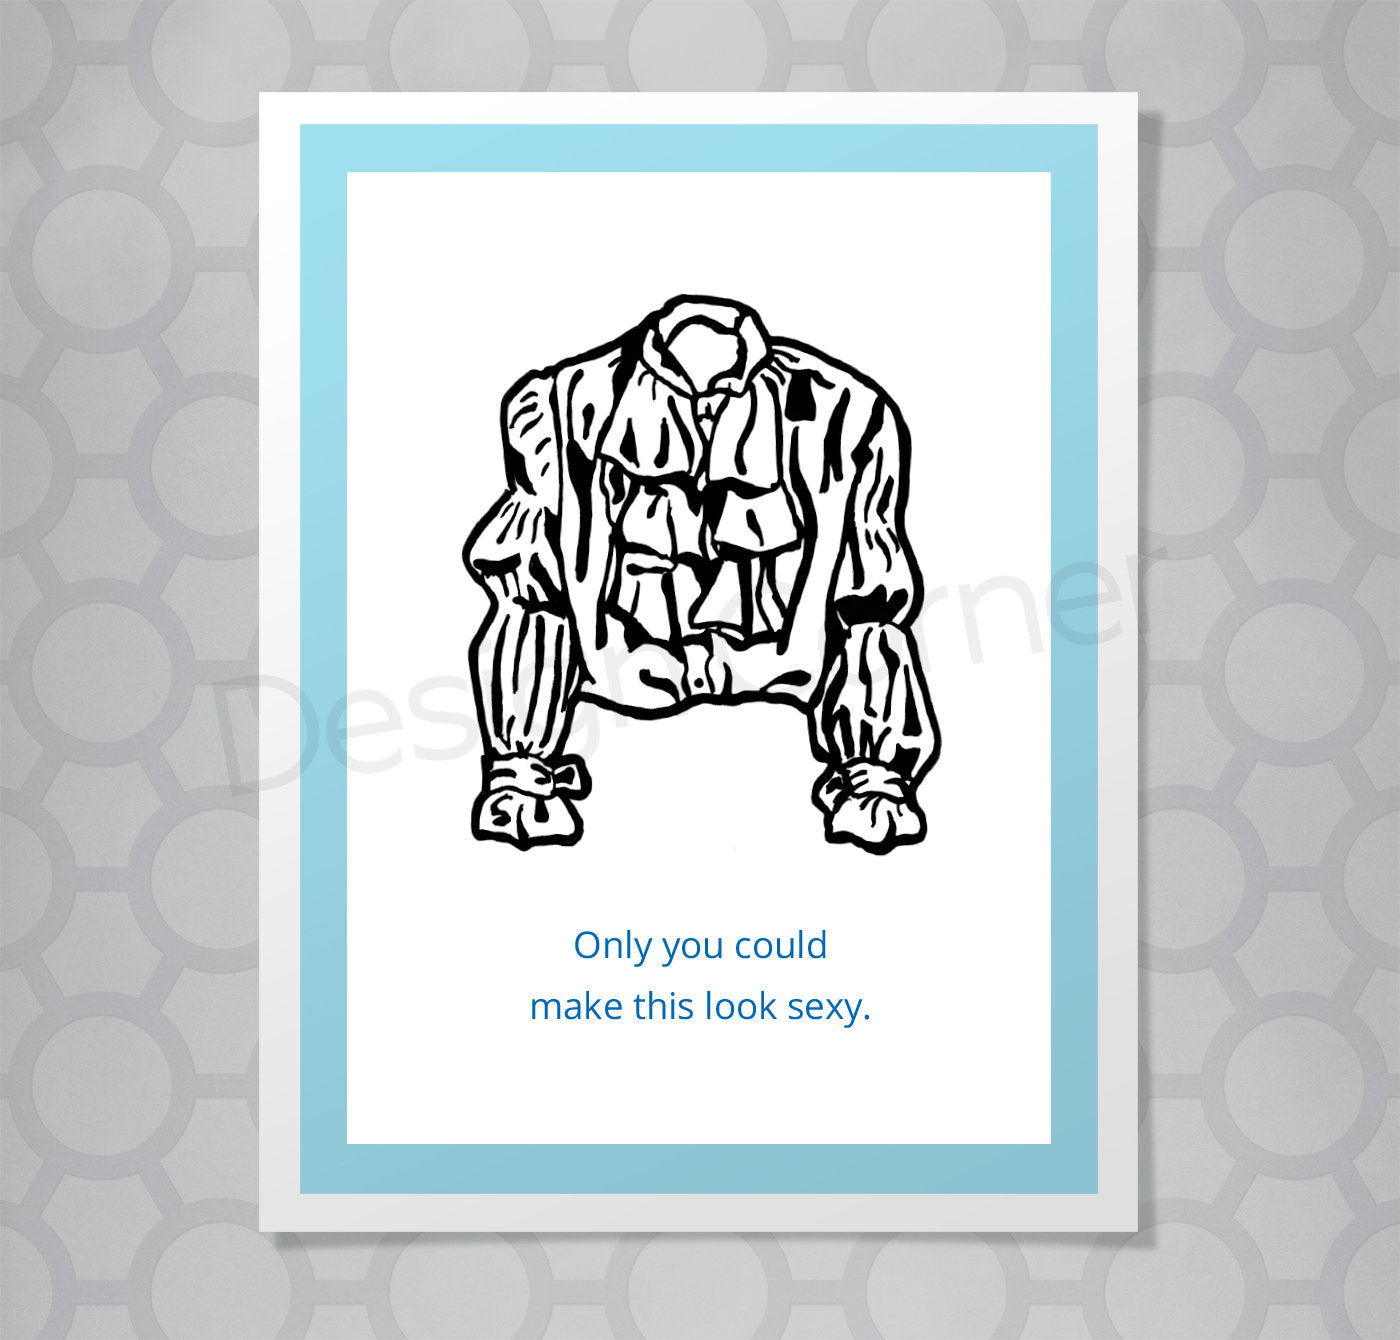 Greeting card with illustration of Seinfeld's puffy shirt. Caption says "Only you could make this look sexy."